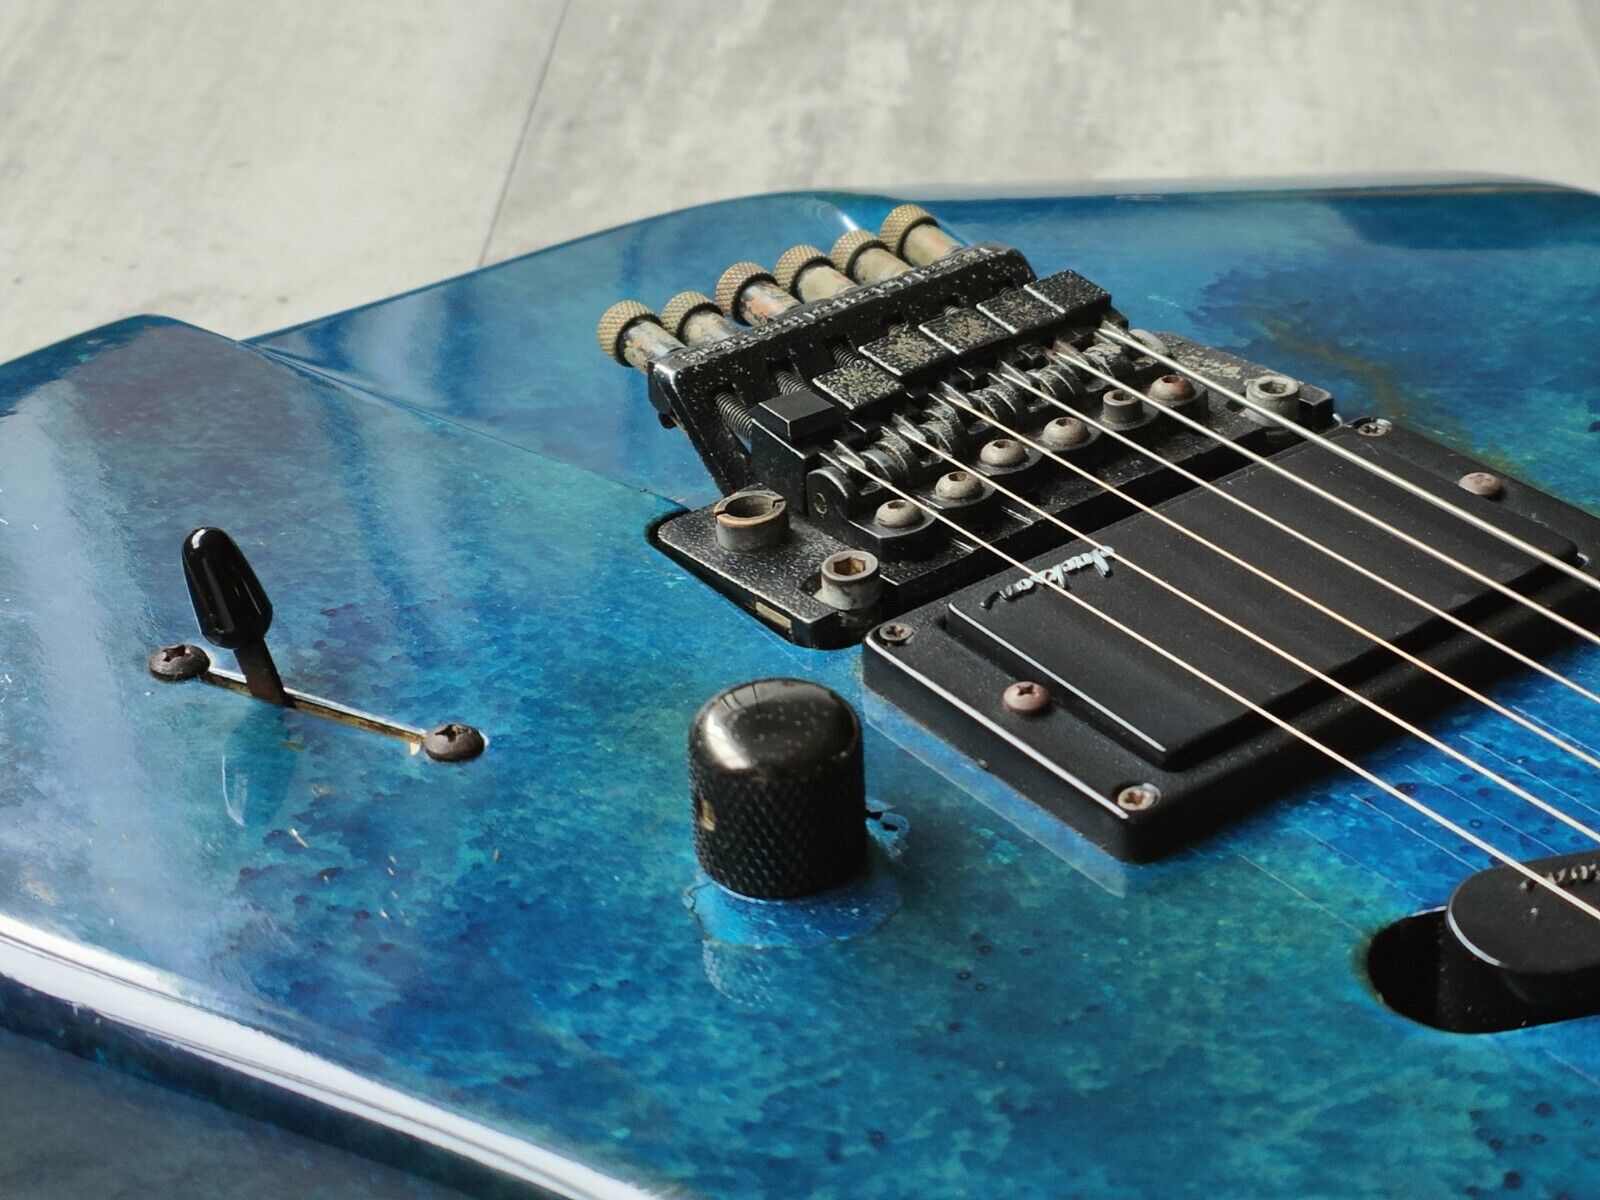 1988 Jackson USA "Limited Edition '88" Superstrat (Blue Jeans)